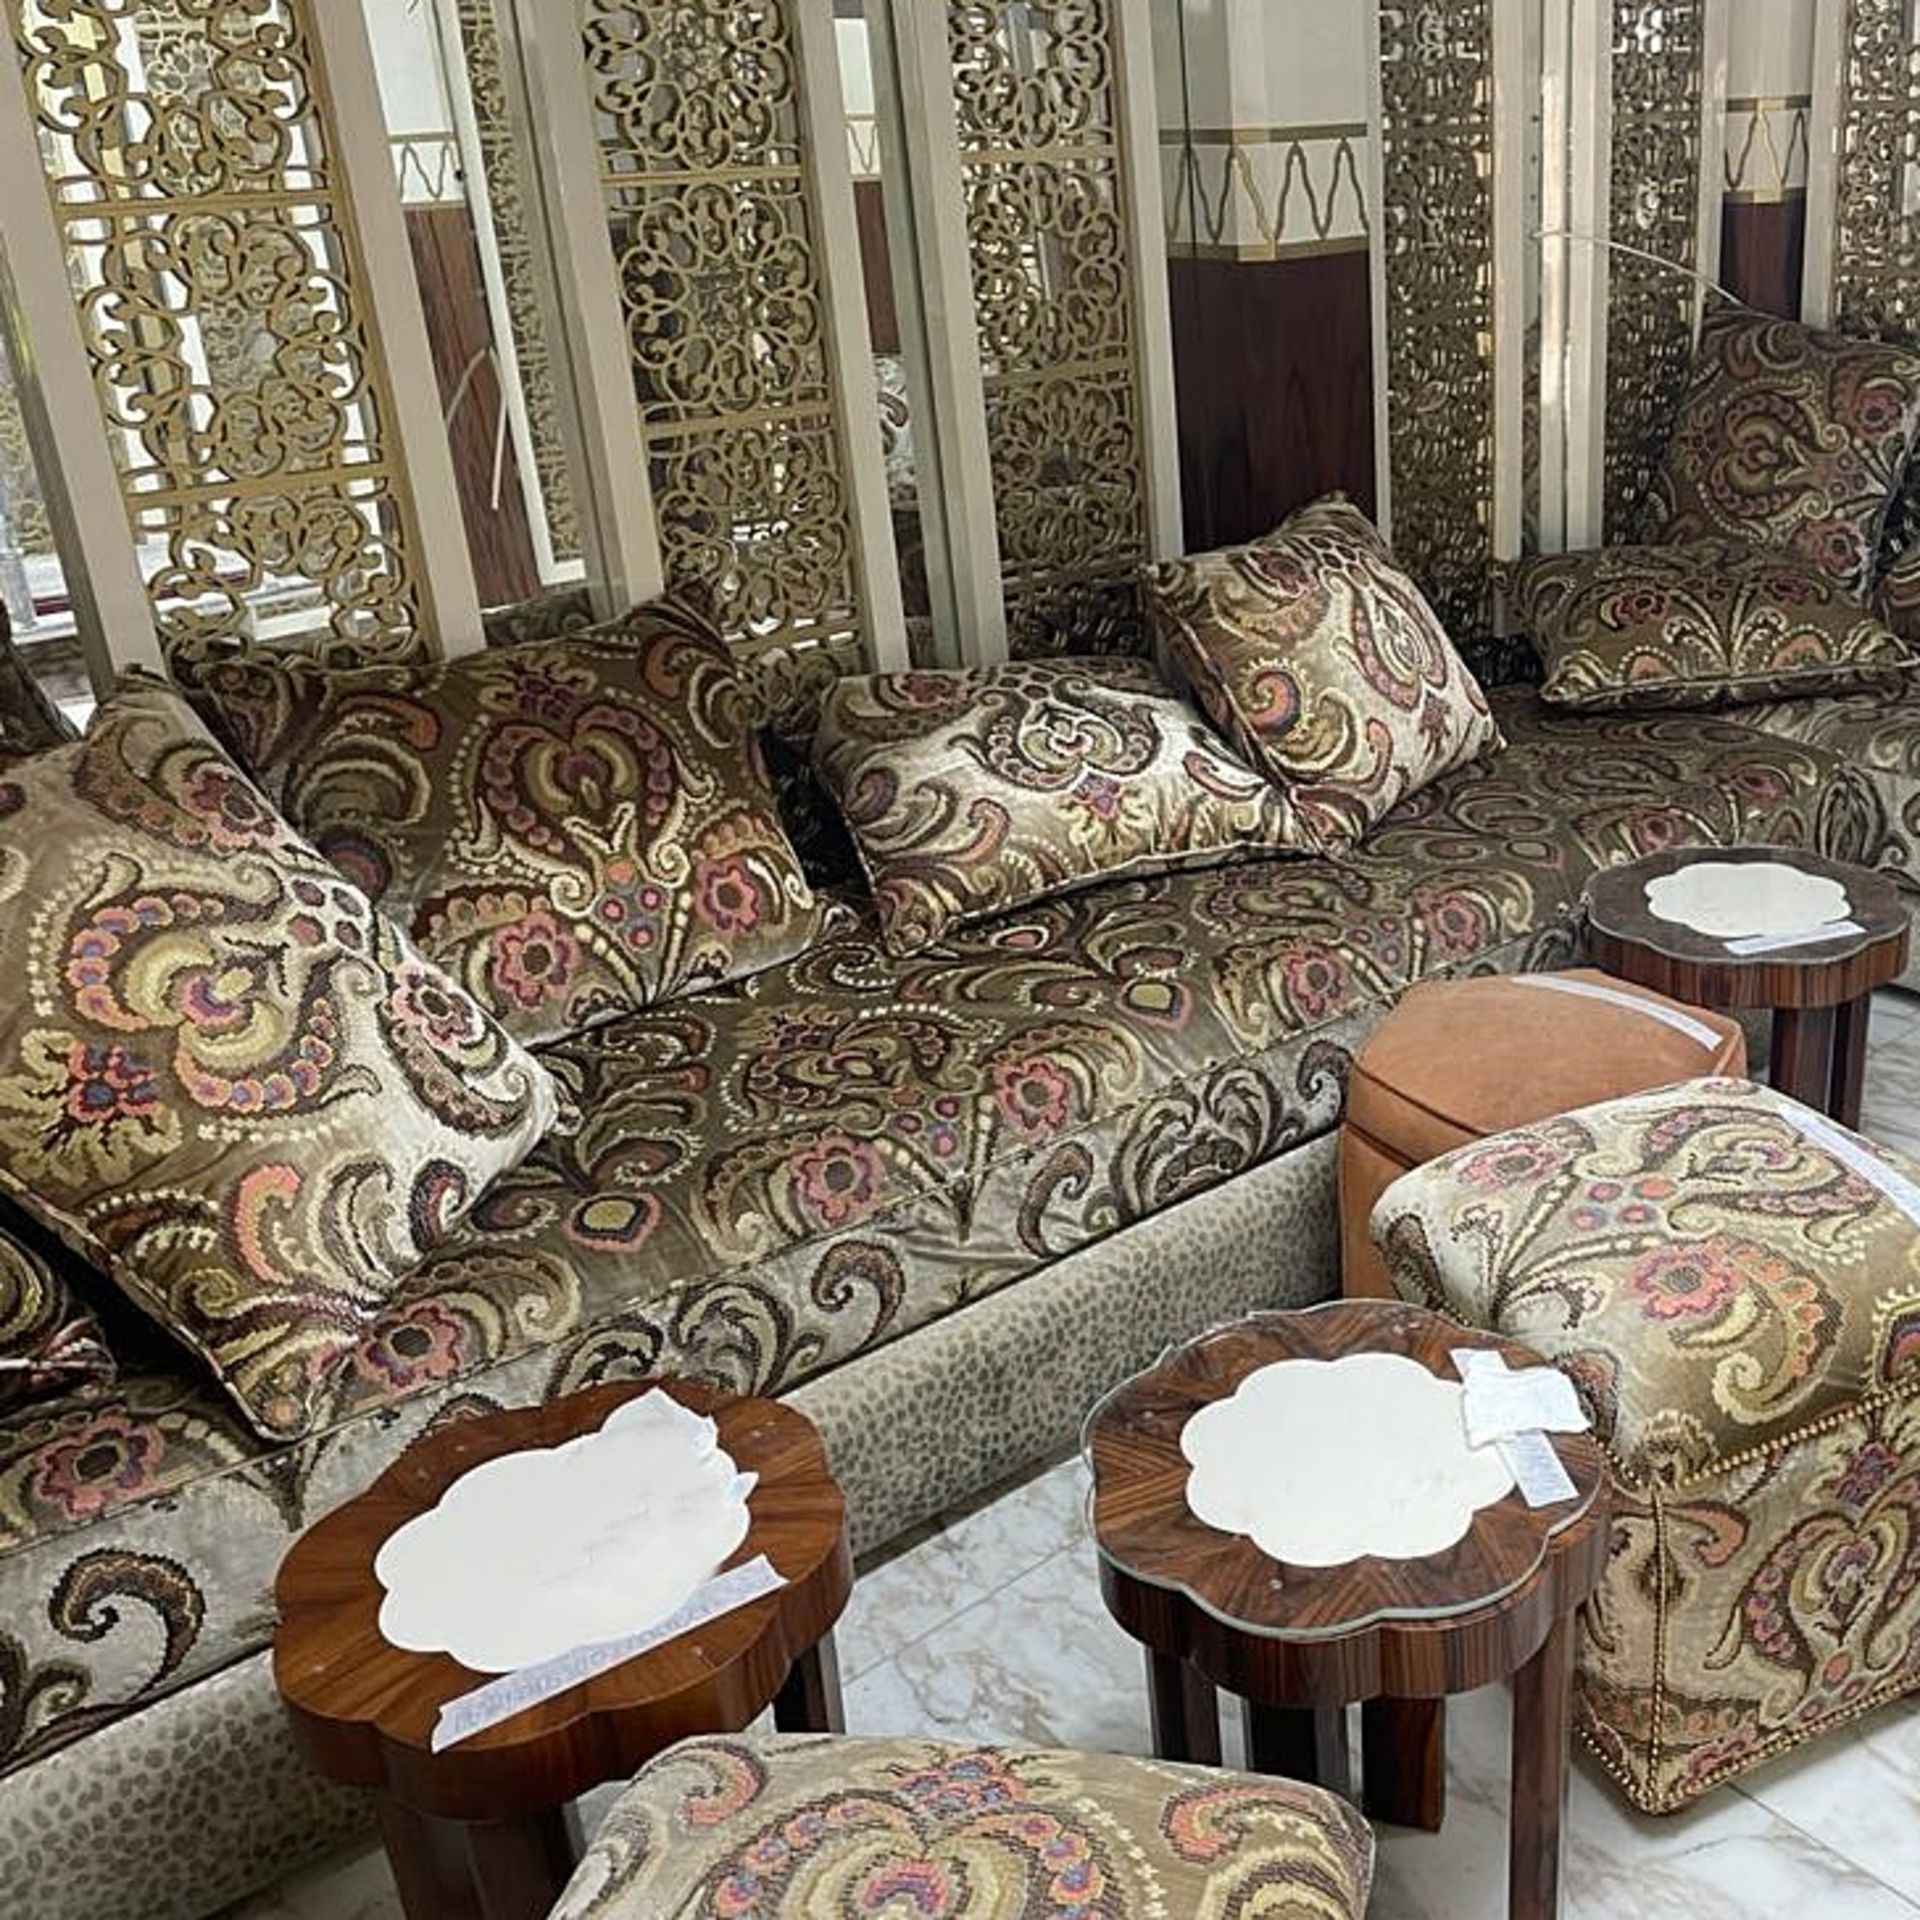 1 x Impressive 9ft Long Moroccan-style Seating Bench With Matching Footstool And 6 x Scatter - Image 9 of 9